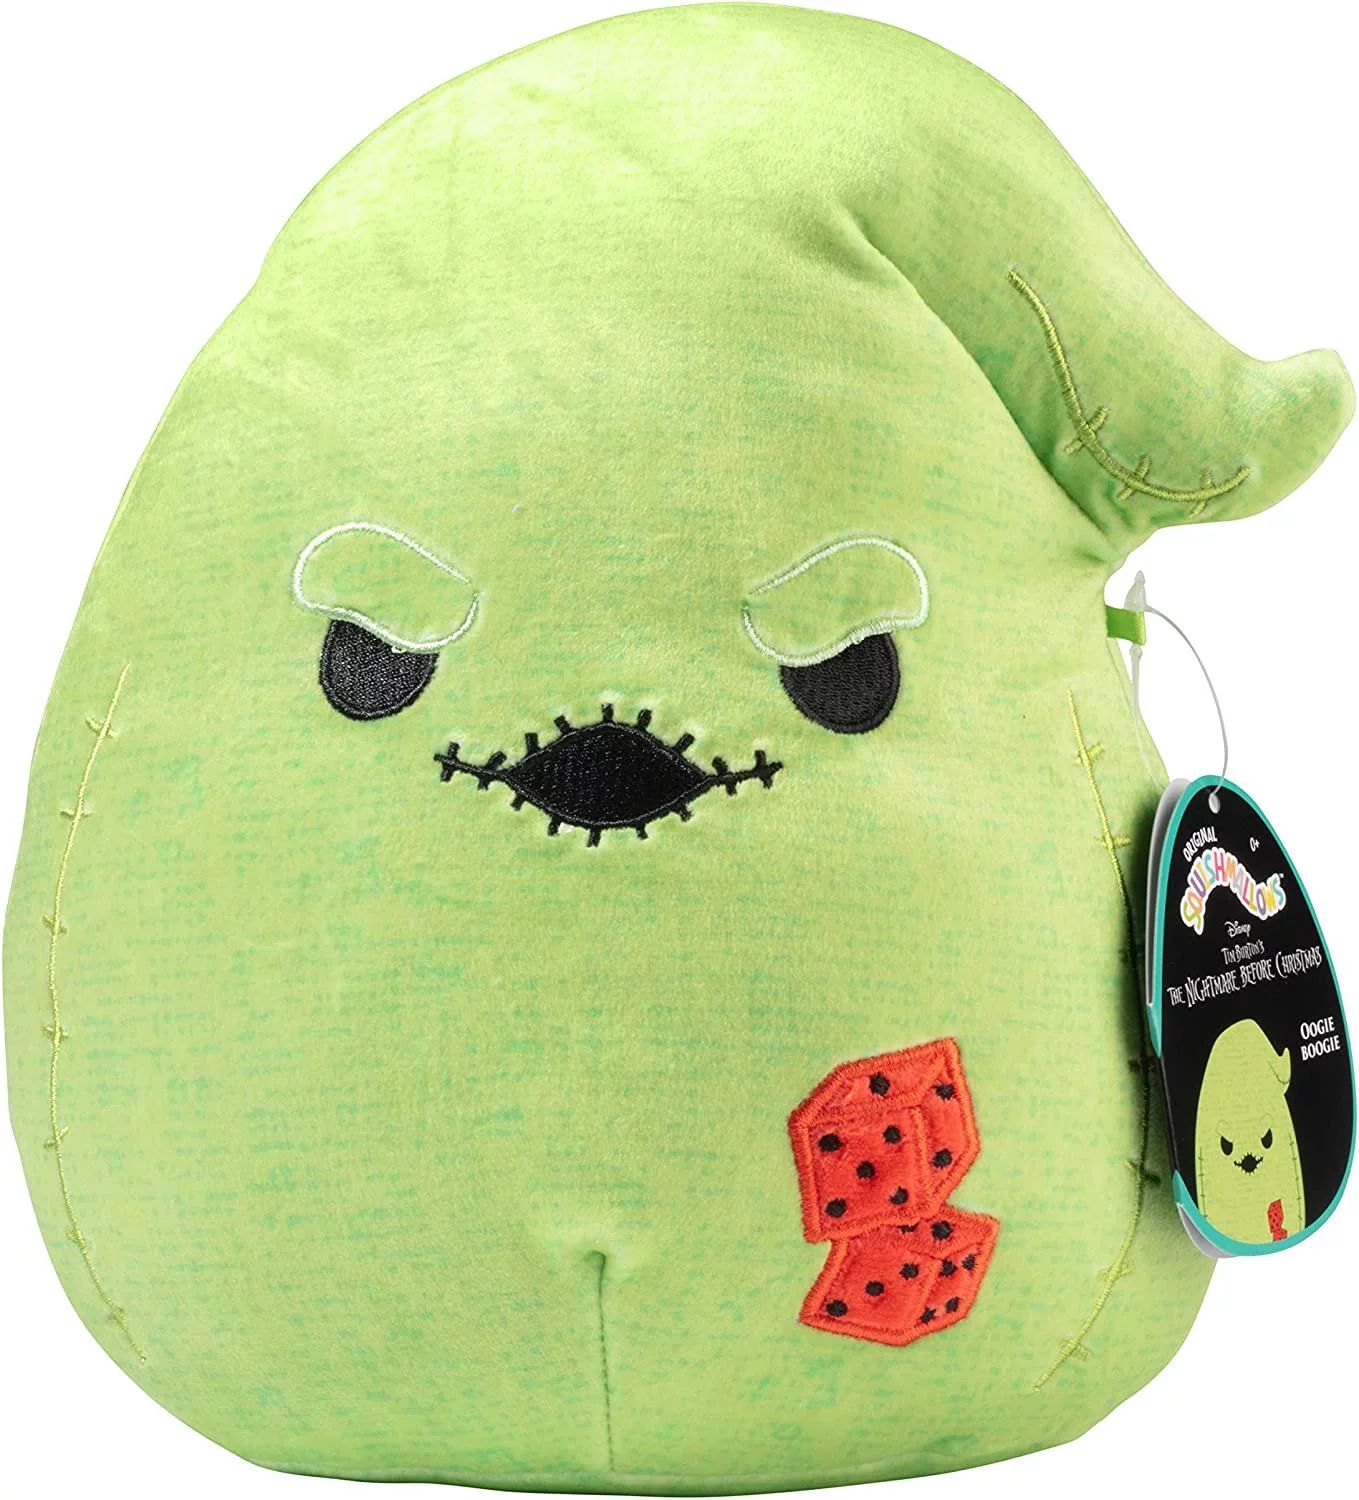 Squishmallow 8" Nightmare Before Christmas Oogie Boogie, Green - Official Kellytoy Halloween Holi... | Walmart (US)